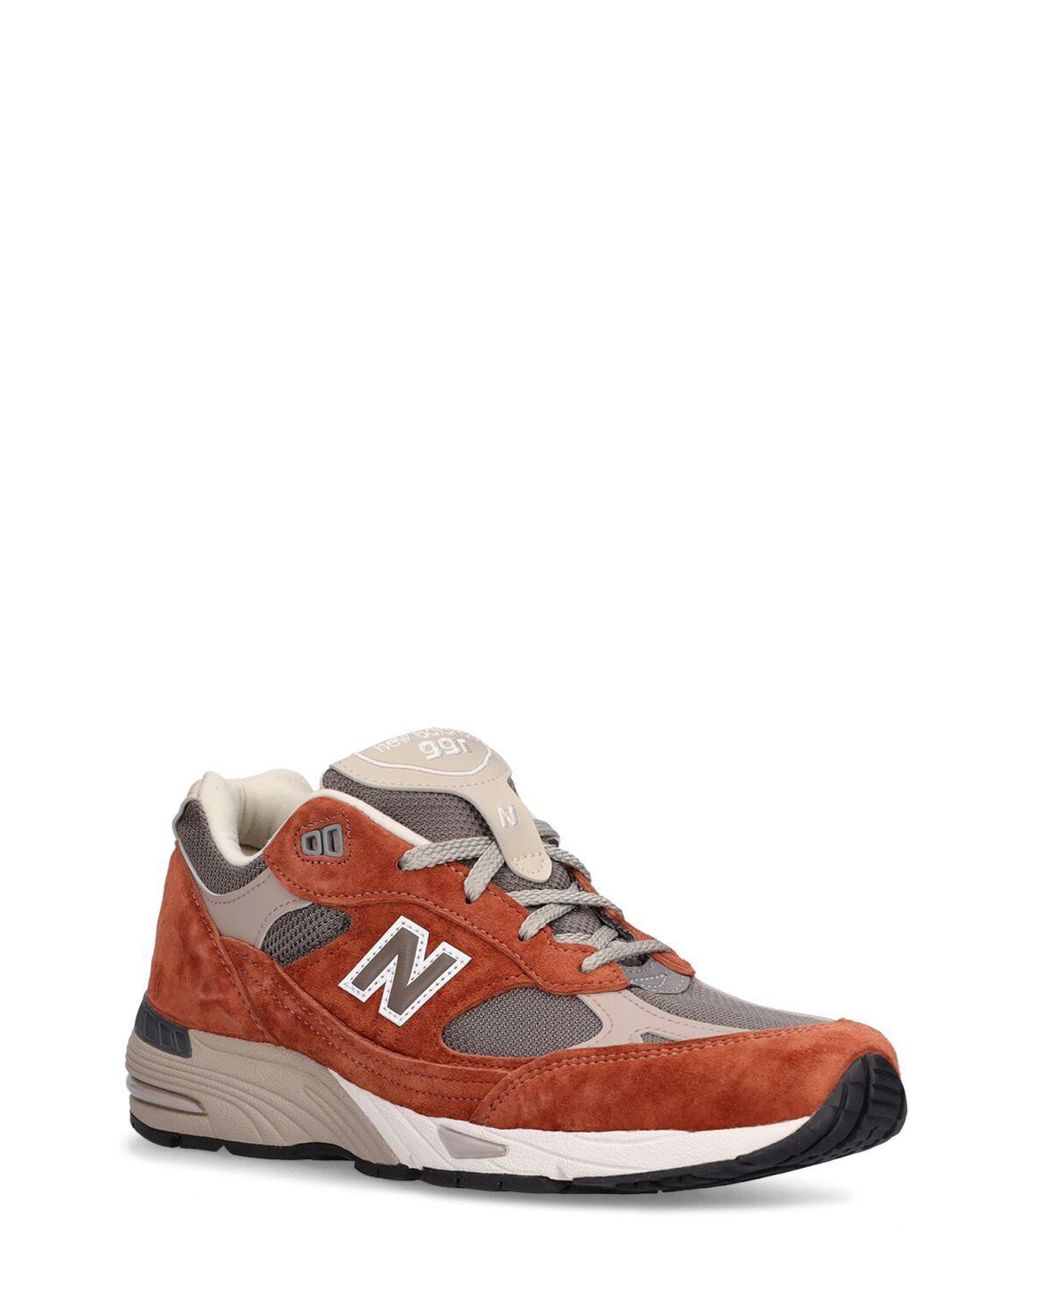 New Balance 991 Made In Uk Sneakers in Red | Lyst